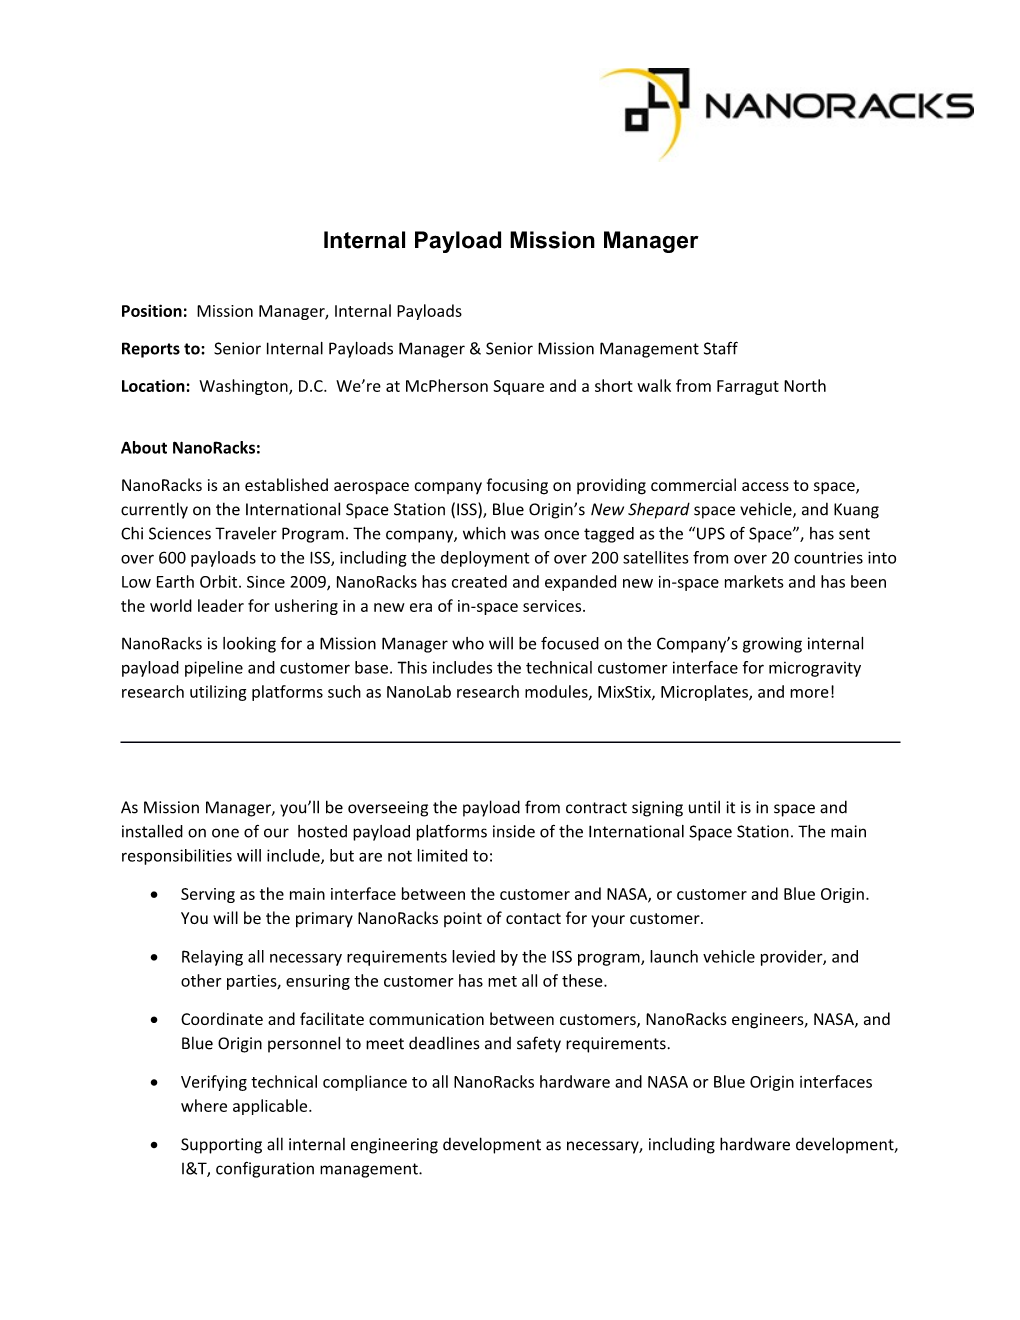 Internal Payload Mission Manager